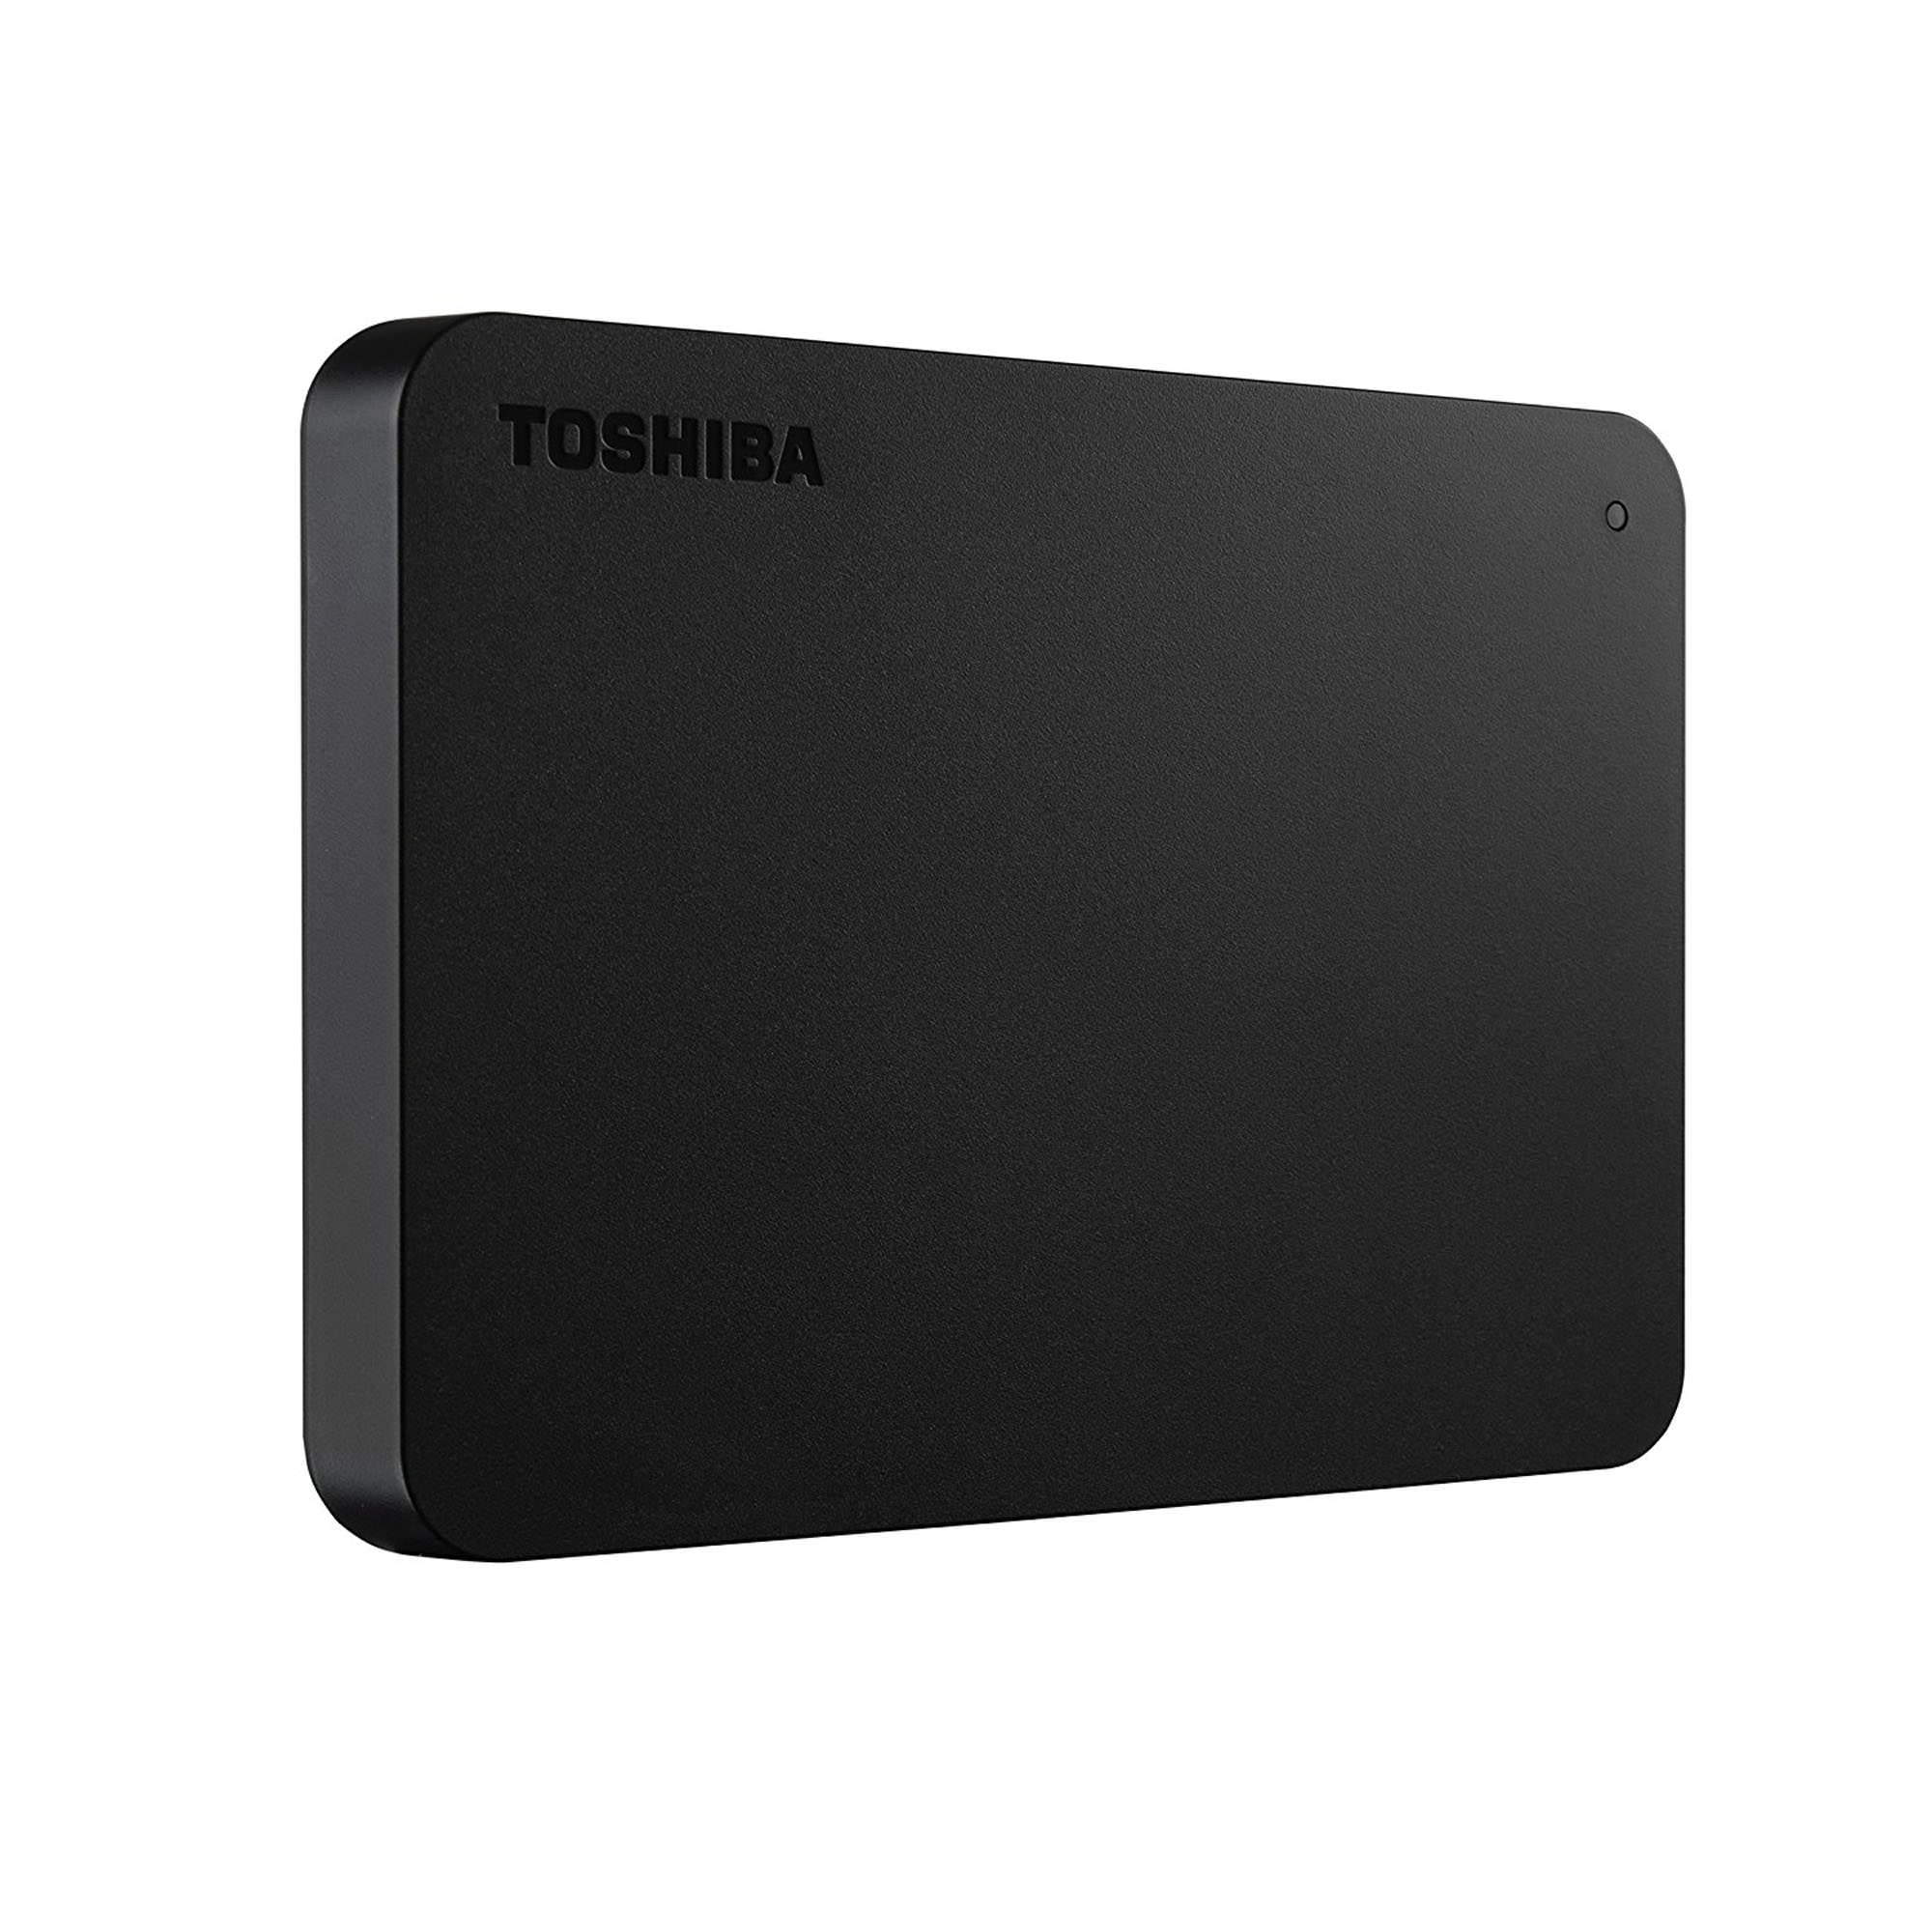 Toshiba Canvio Basics 1TB,External,5400RPM (HDTB310XK3AA) HDD for sale  online